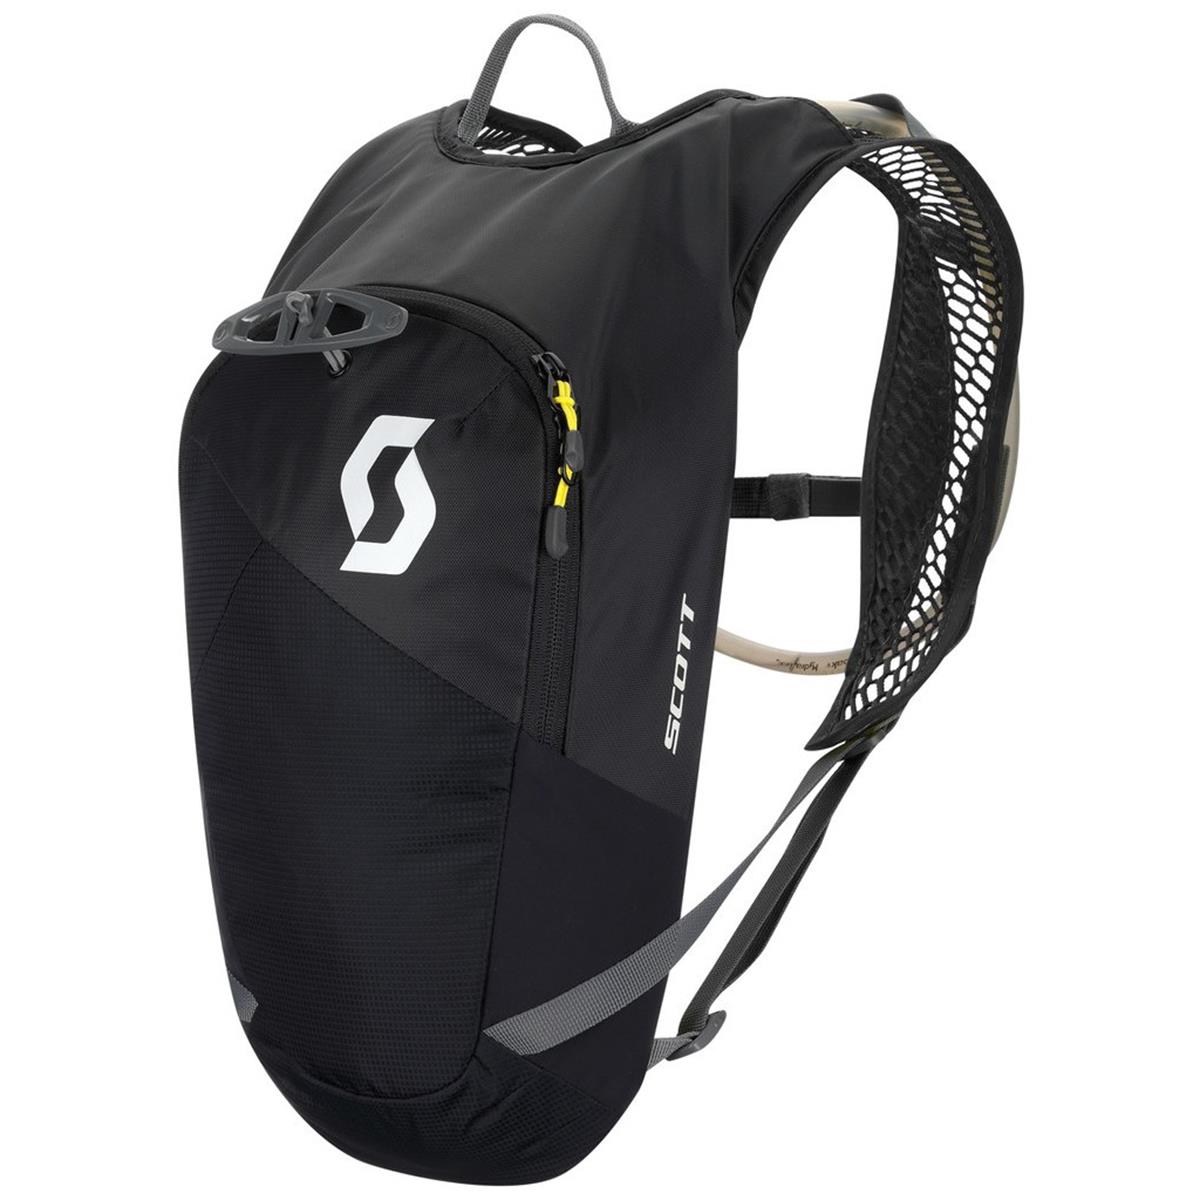 Scott Backpack with Hydration System Compartment Perform Evo HY'4 Caviar Black